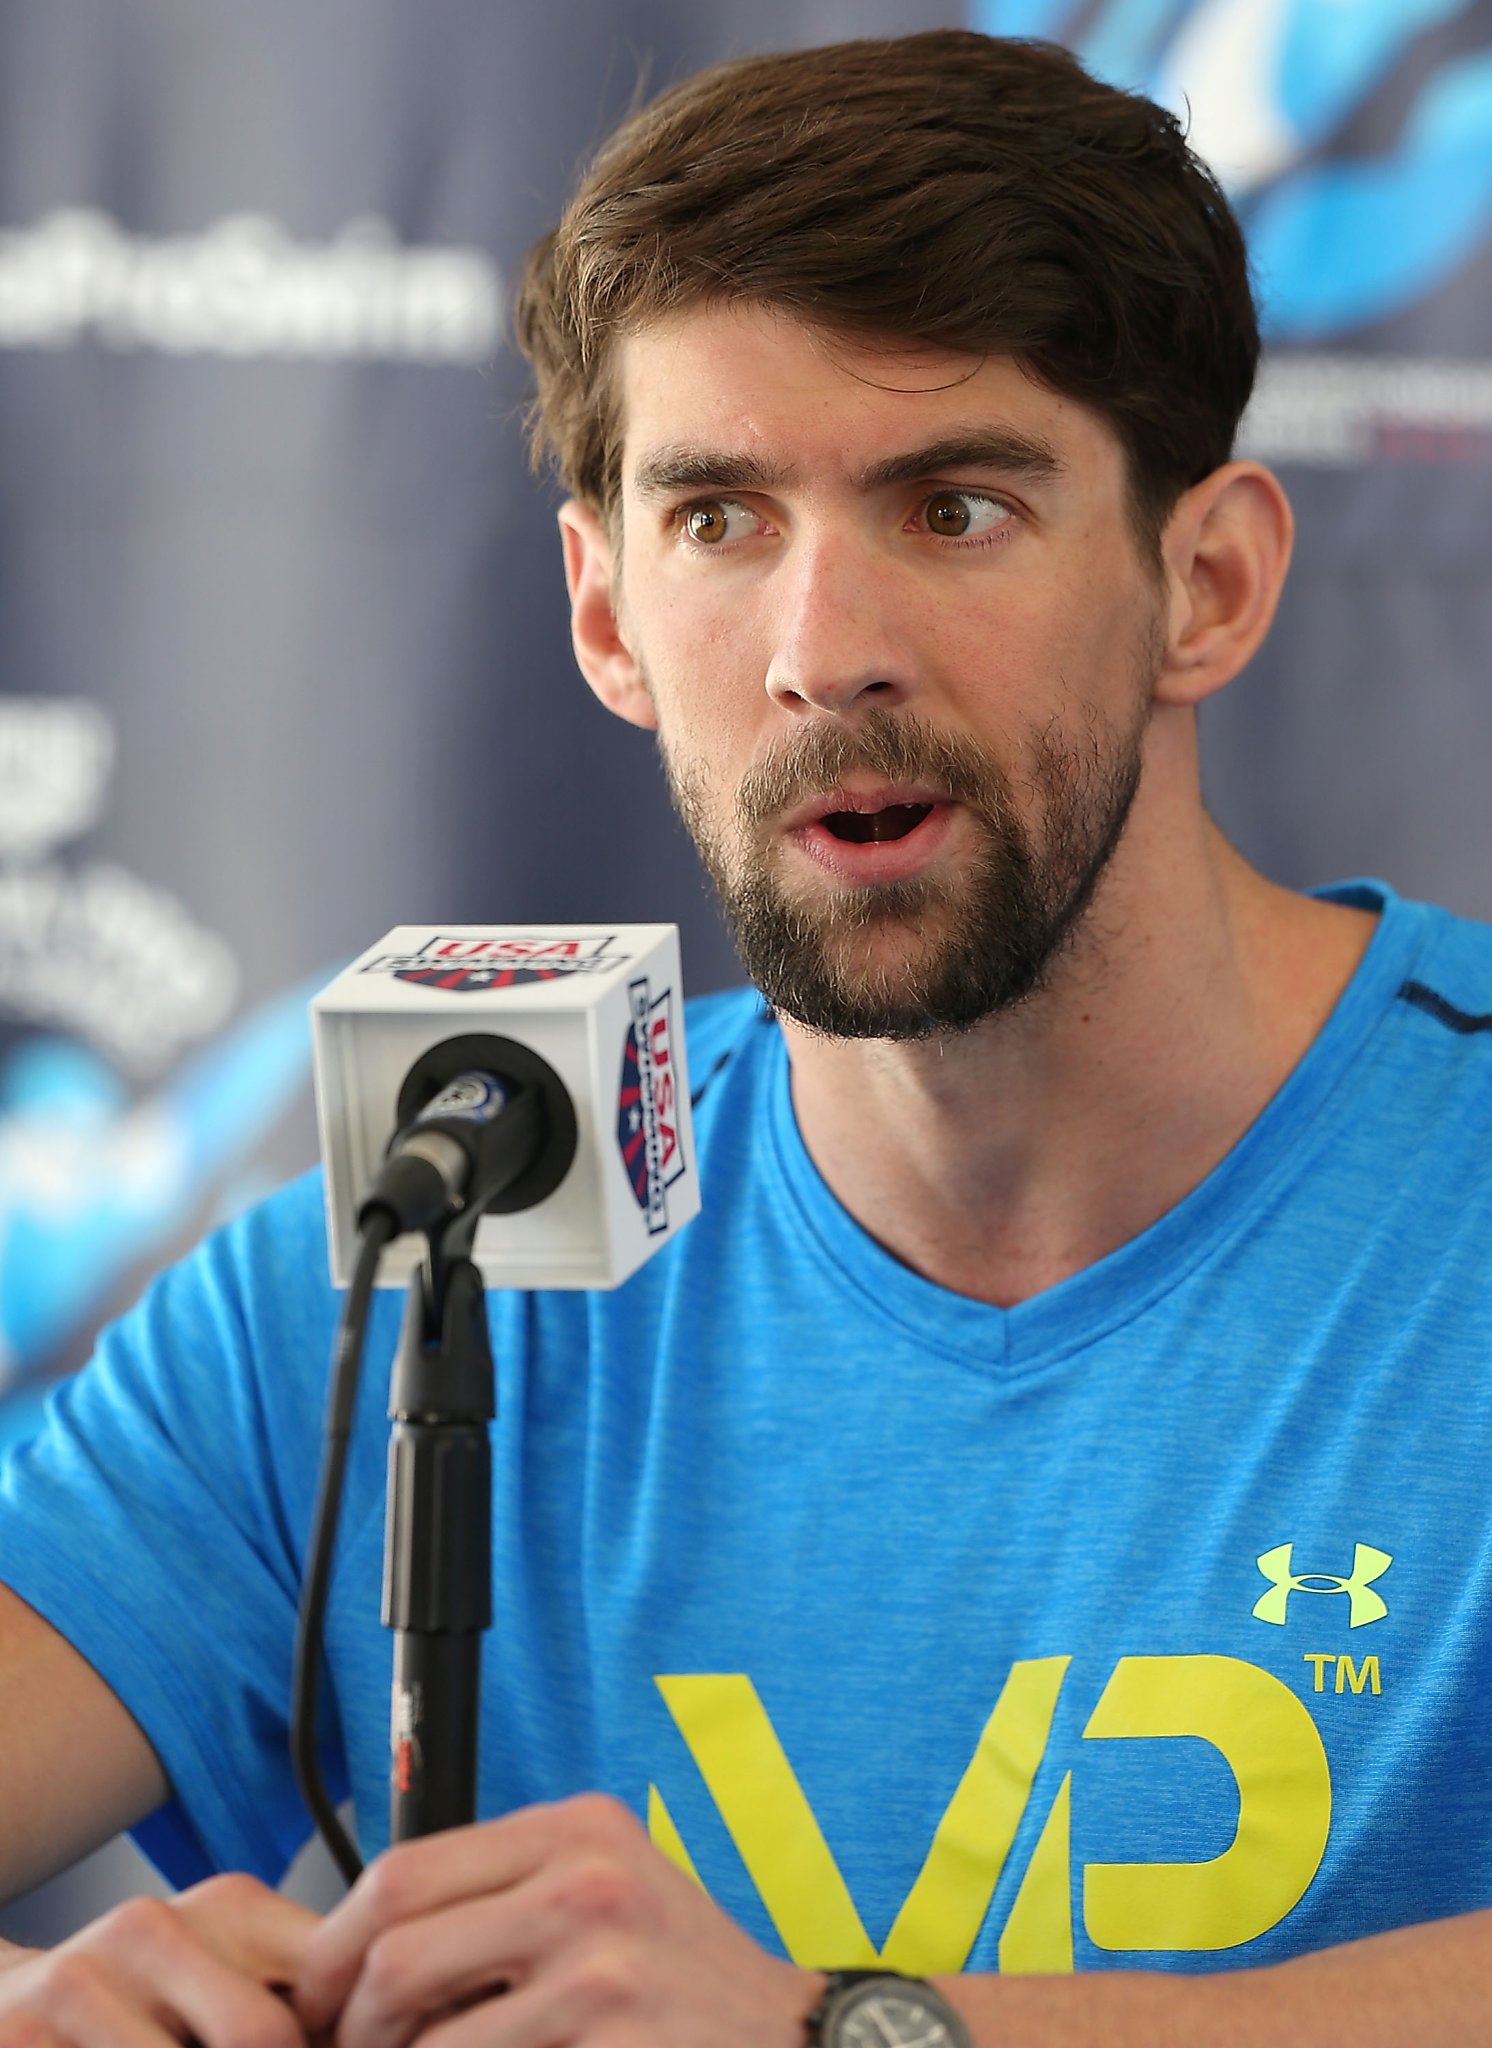 Names and faces: Michael Phelps, Dontrelle Willis